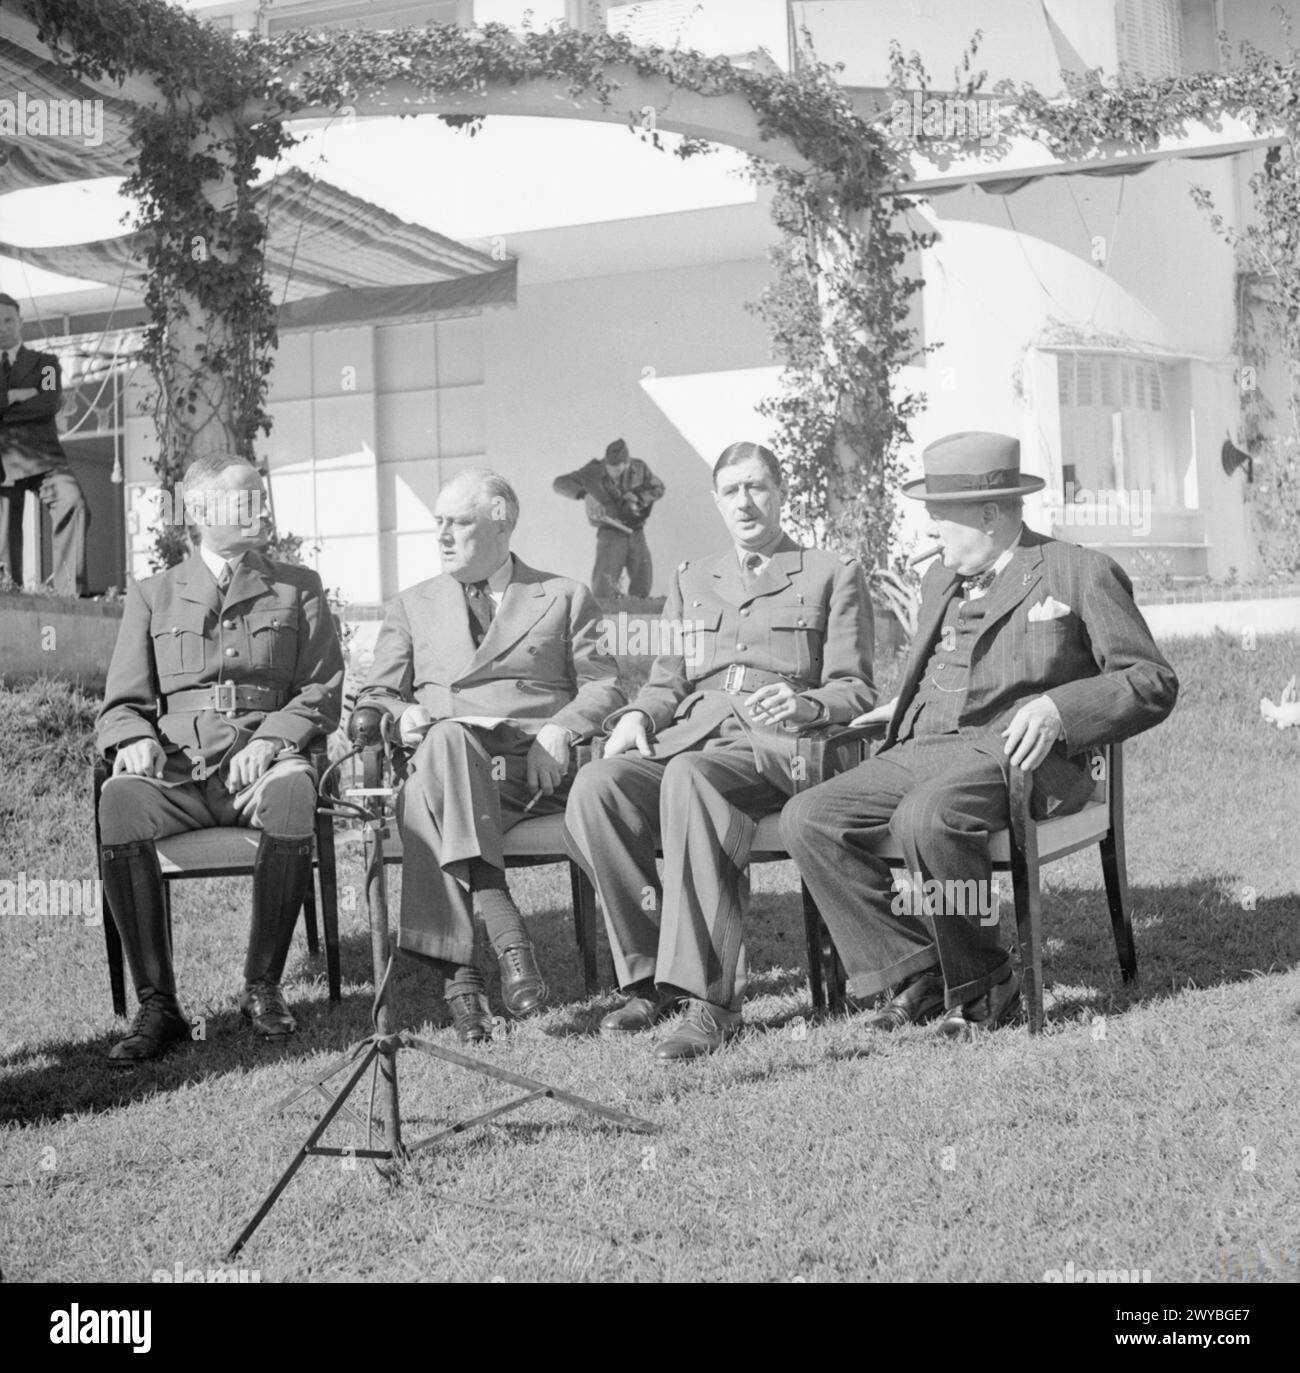 THE CASABLANCA CONFERENCE, JANUARY 1943 - General Henri Giraud, the High Commissioner of French North and West Africa, President Franklin D. Roosevelt, General Charles de Gaulle, the leader of the Free French, and Prime Minister Winston Churchill during a press conference at Villa Dar es Saada, Casablanca, 24 January 1943. , Churchill, Winston Leonard Spencer, Roosevelt, Franklin Delano, Giraud, Henri Honore, de Gaulle, Charles André Joseph Marie, French Army Stock Photo